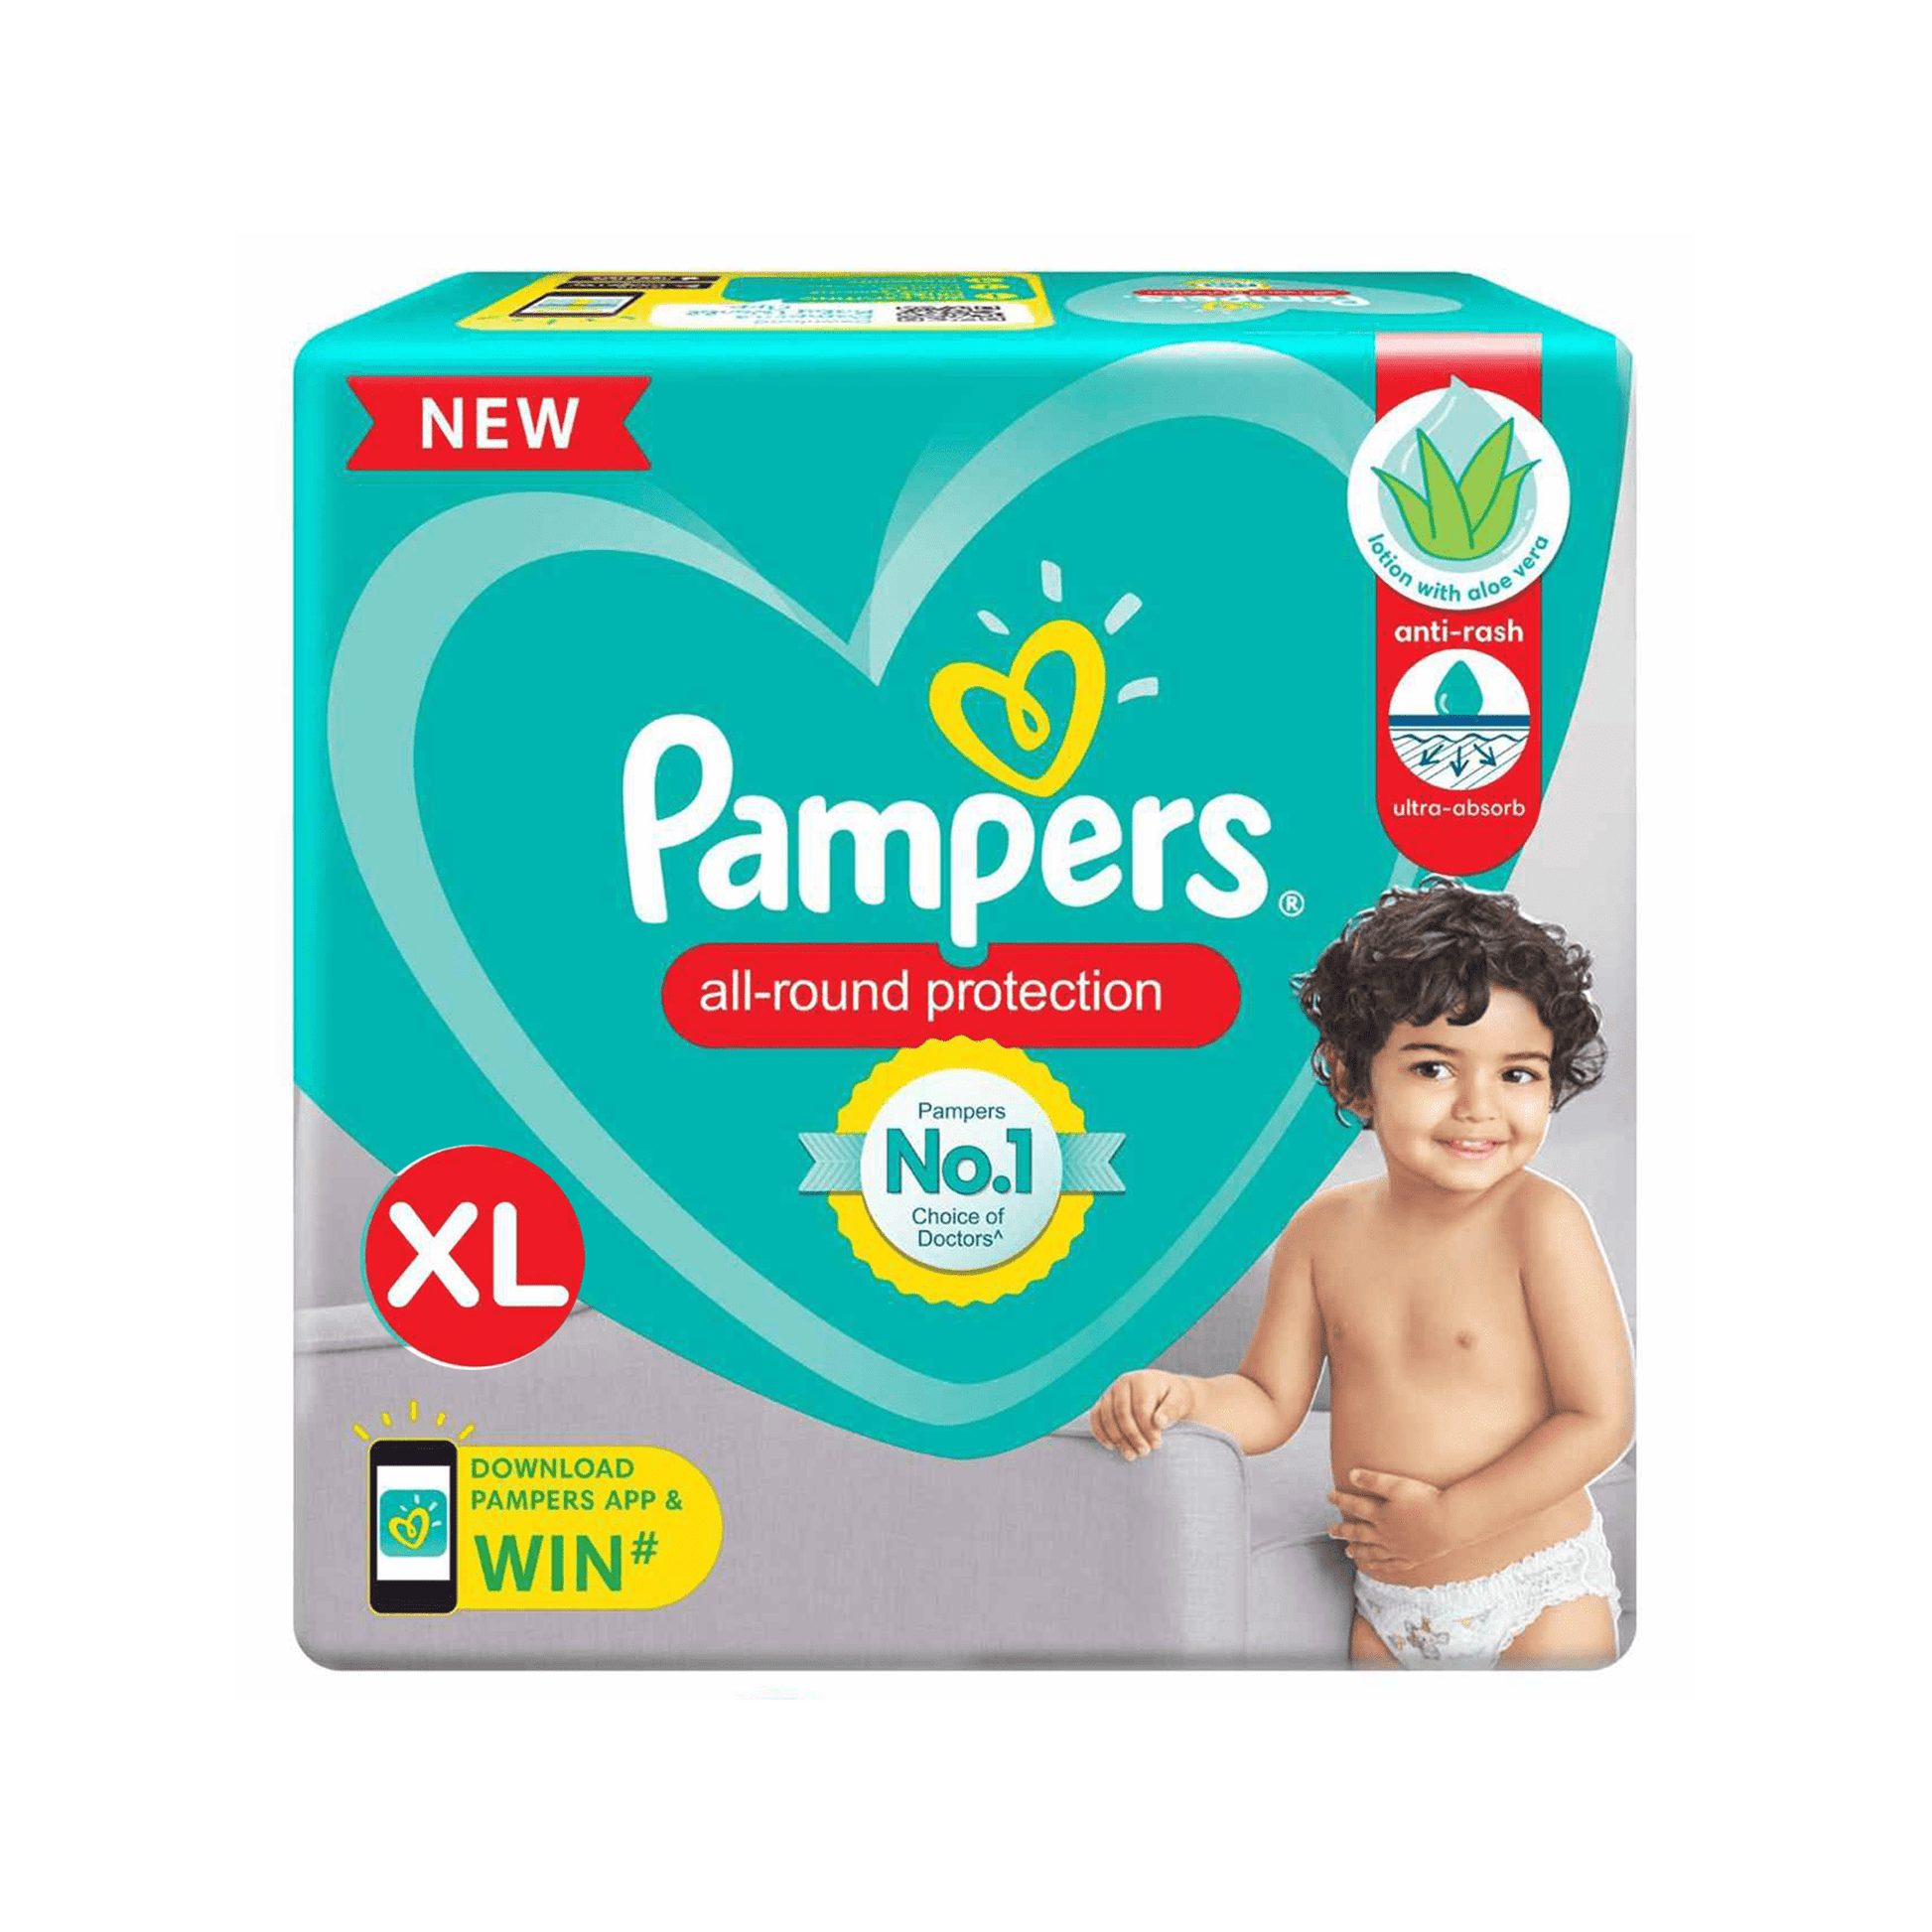 Pampers All Round Protection Diaper Pants, Size-XL.